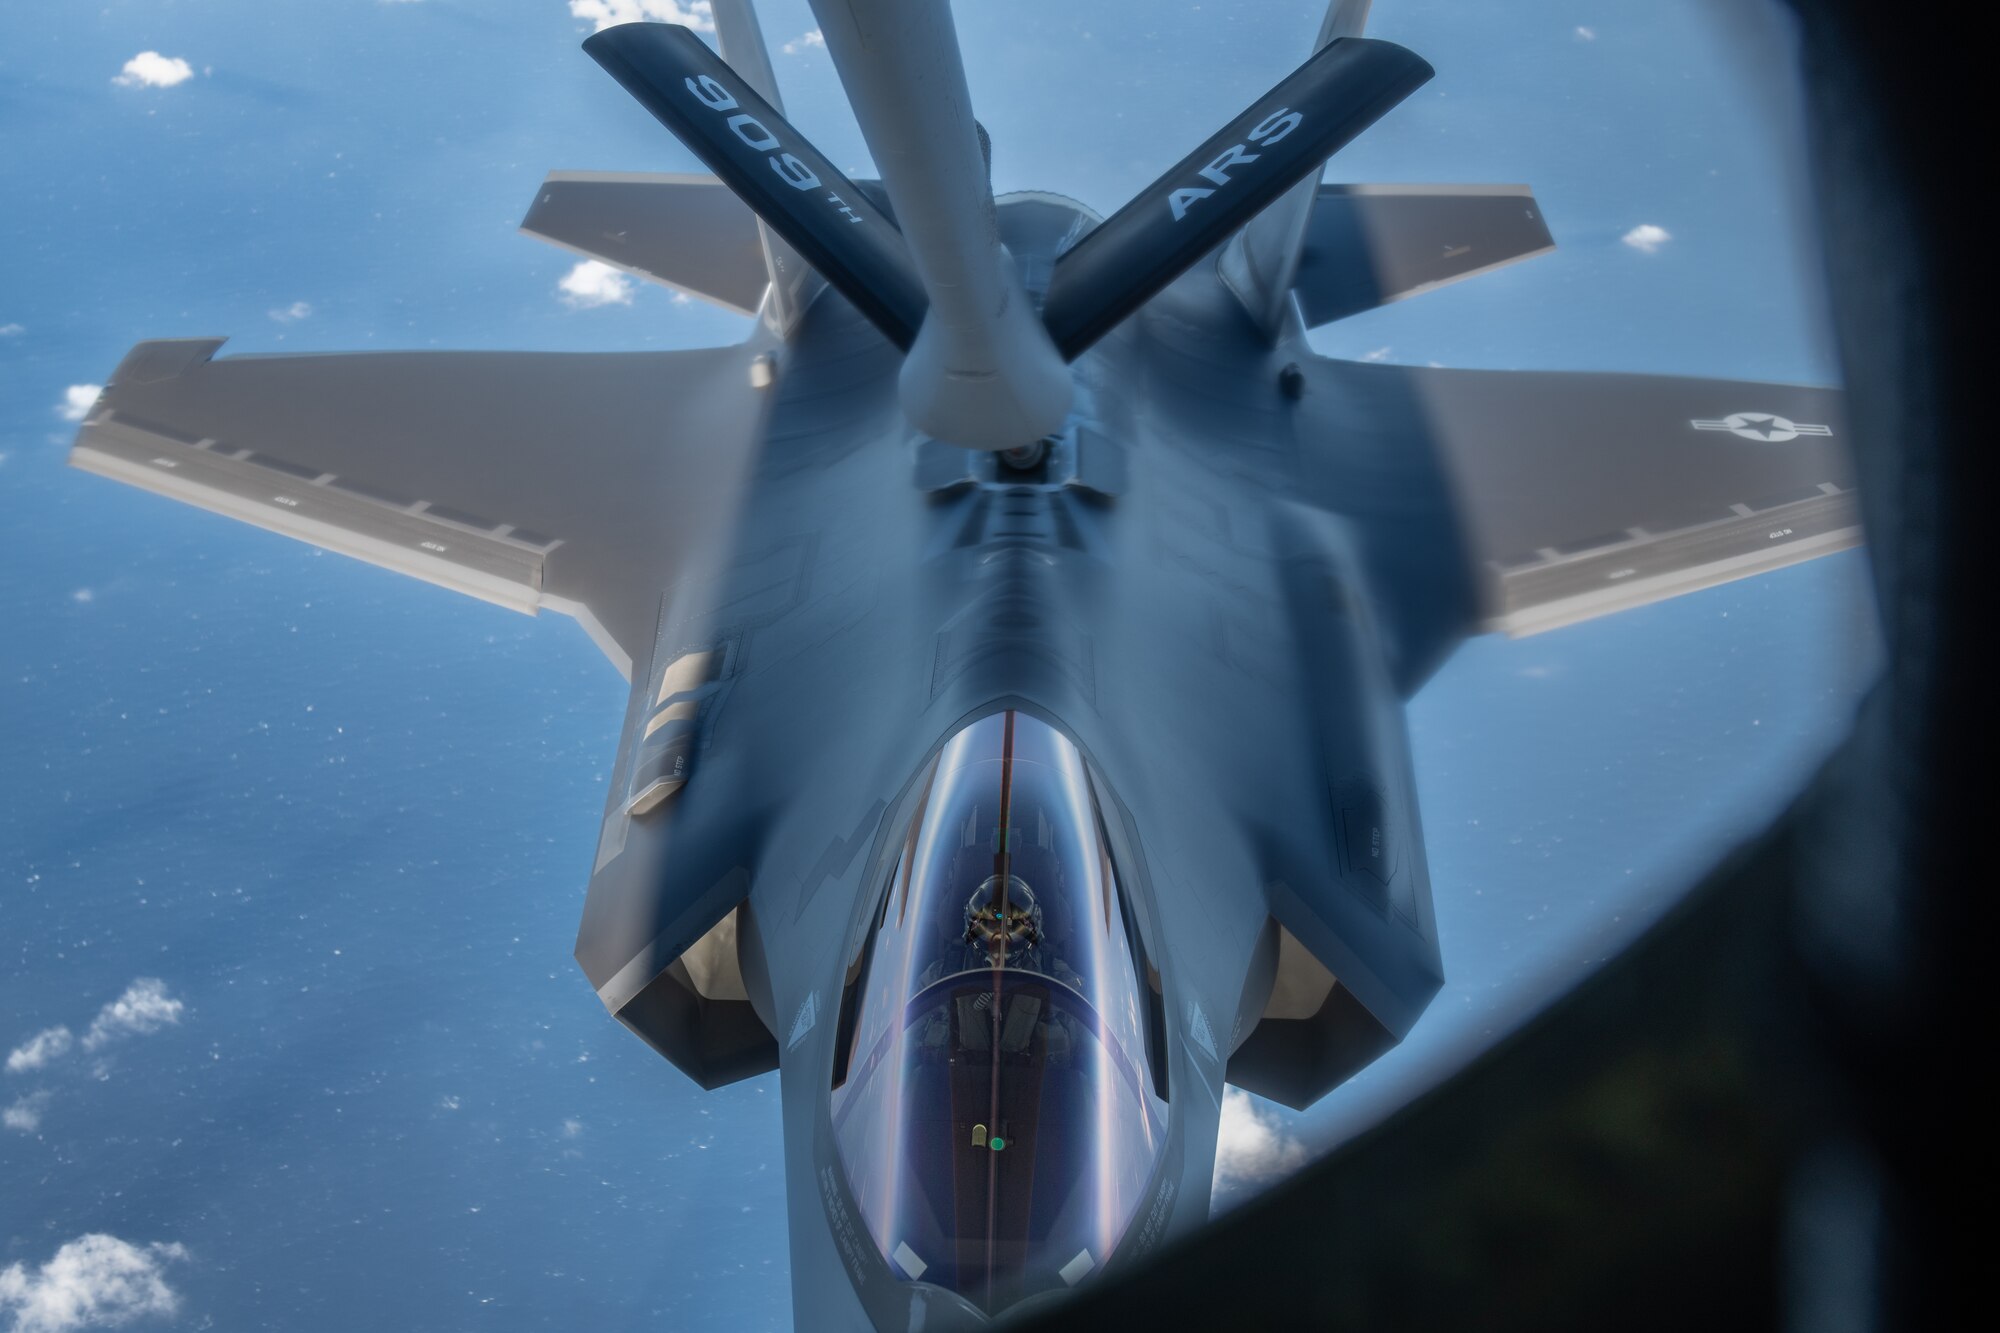 A jet gets refueled by a plane midair